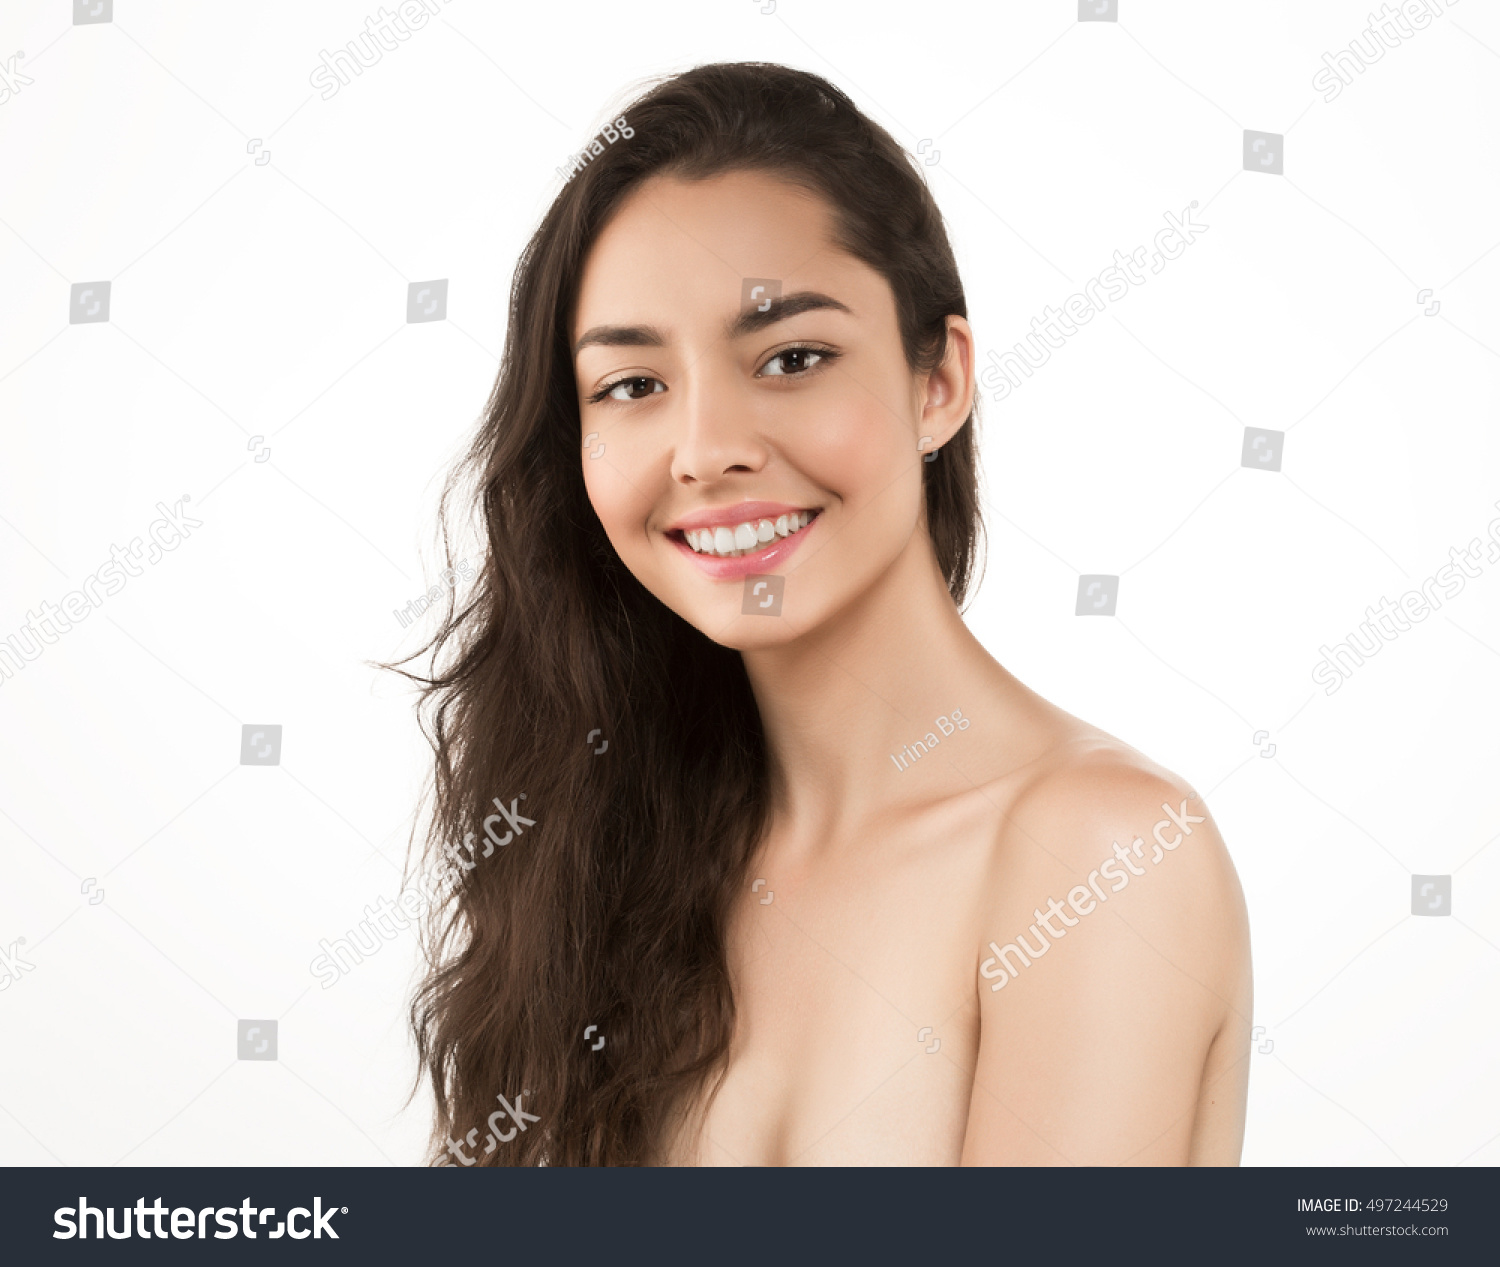 Beauty Woman face Portrait. Beautiful Spa model Girl with Perfect Fresh Clean Skin. Brunette female looking at camera and smiling. Youth and Skin Care Concept  #497244529